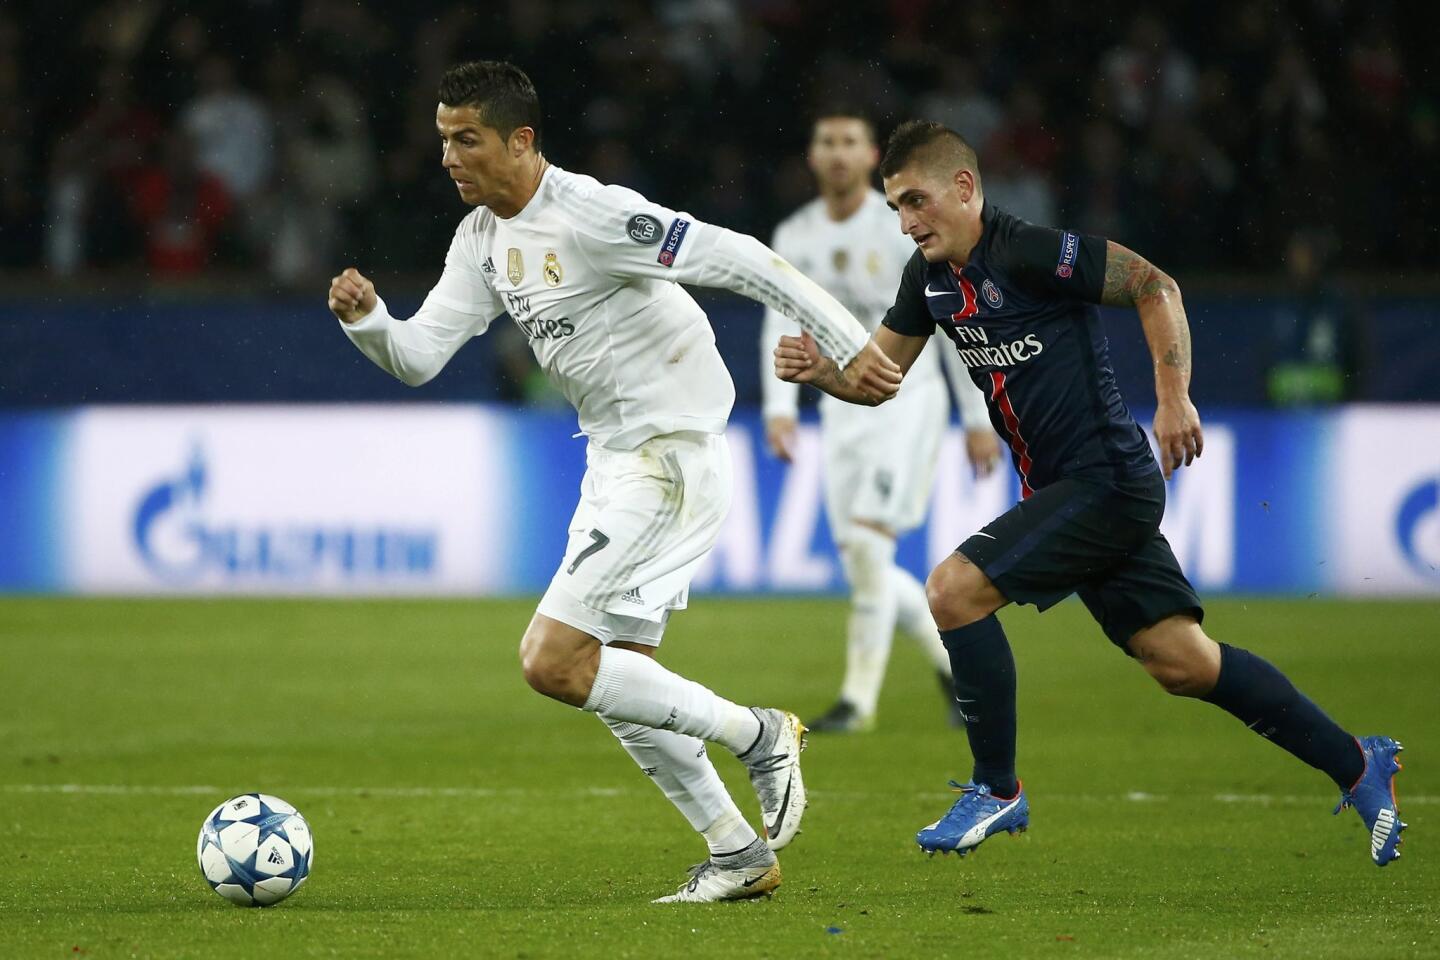 Real Madrid's Cristiano Ronaldo controls the ball against Paris Saint Germain's Marco Verratti during their Champions League Group A soccer match at the Parc des Princes stadium in Paris